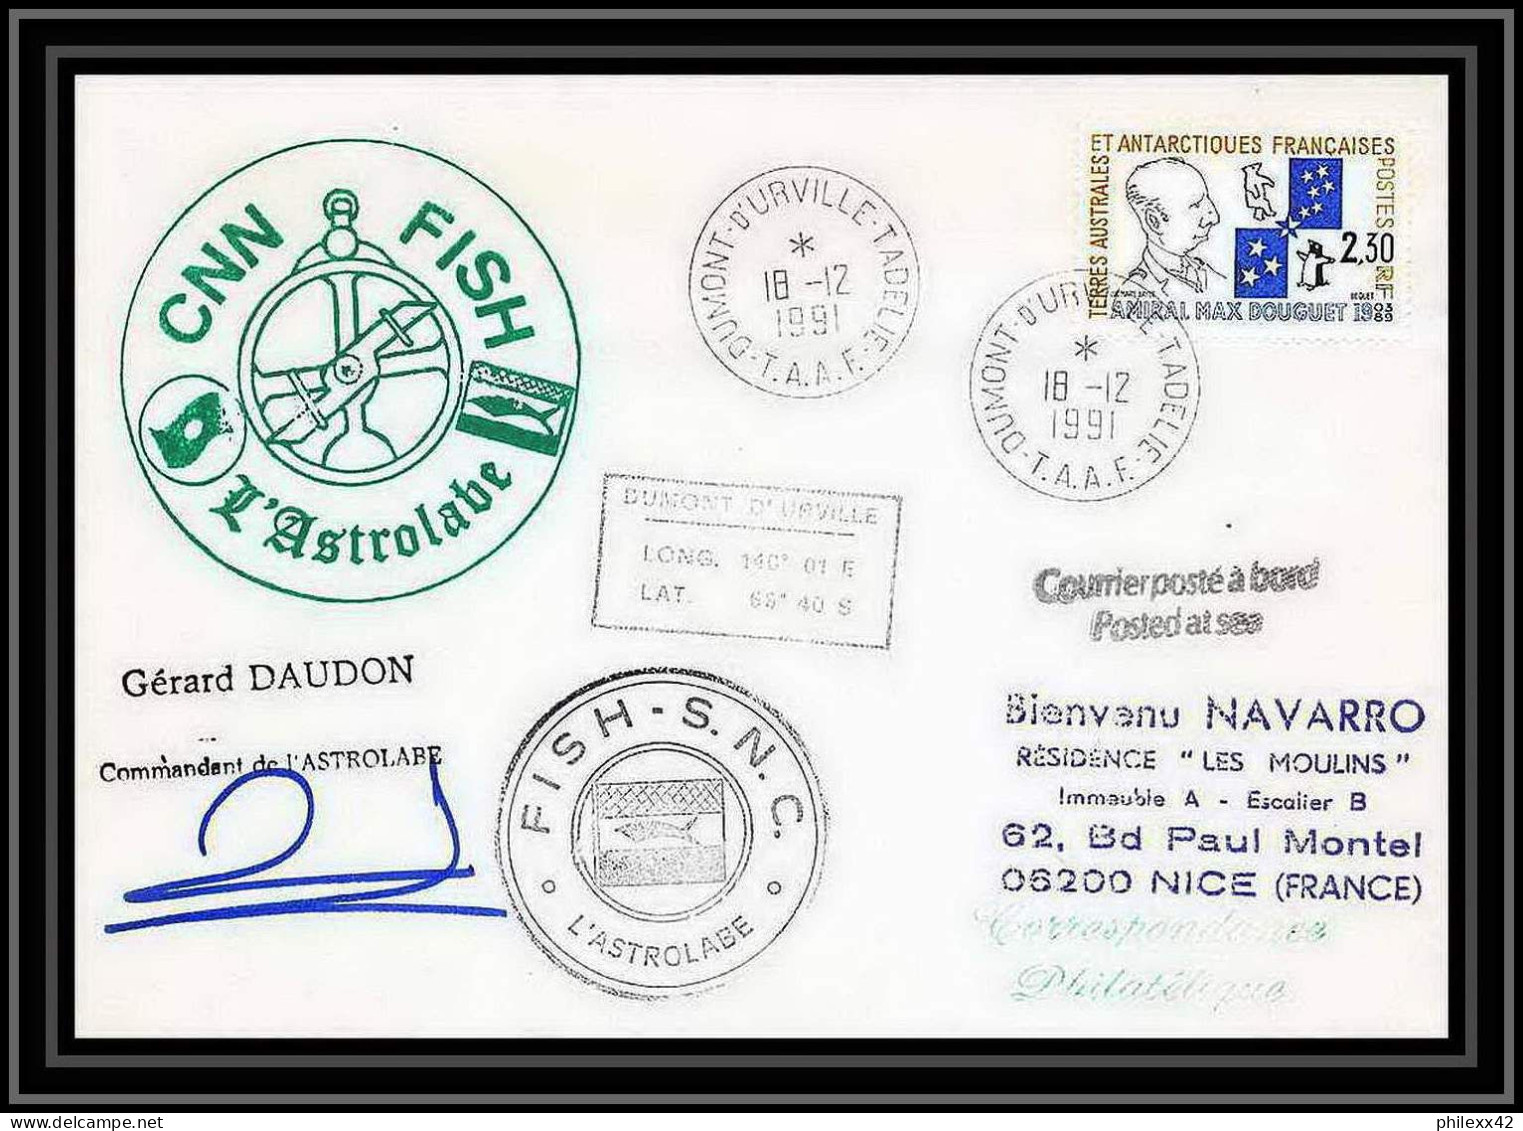 1774 Astrobale Signé Signed Daudon 18/12/1991 TAAF Antarctic Terres Australes Lettre (cover) - Antarctic Expeditions